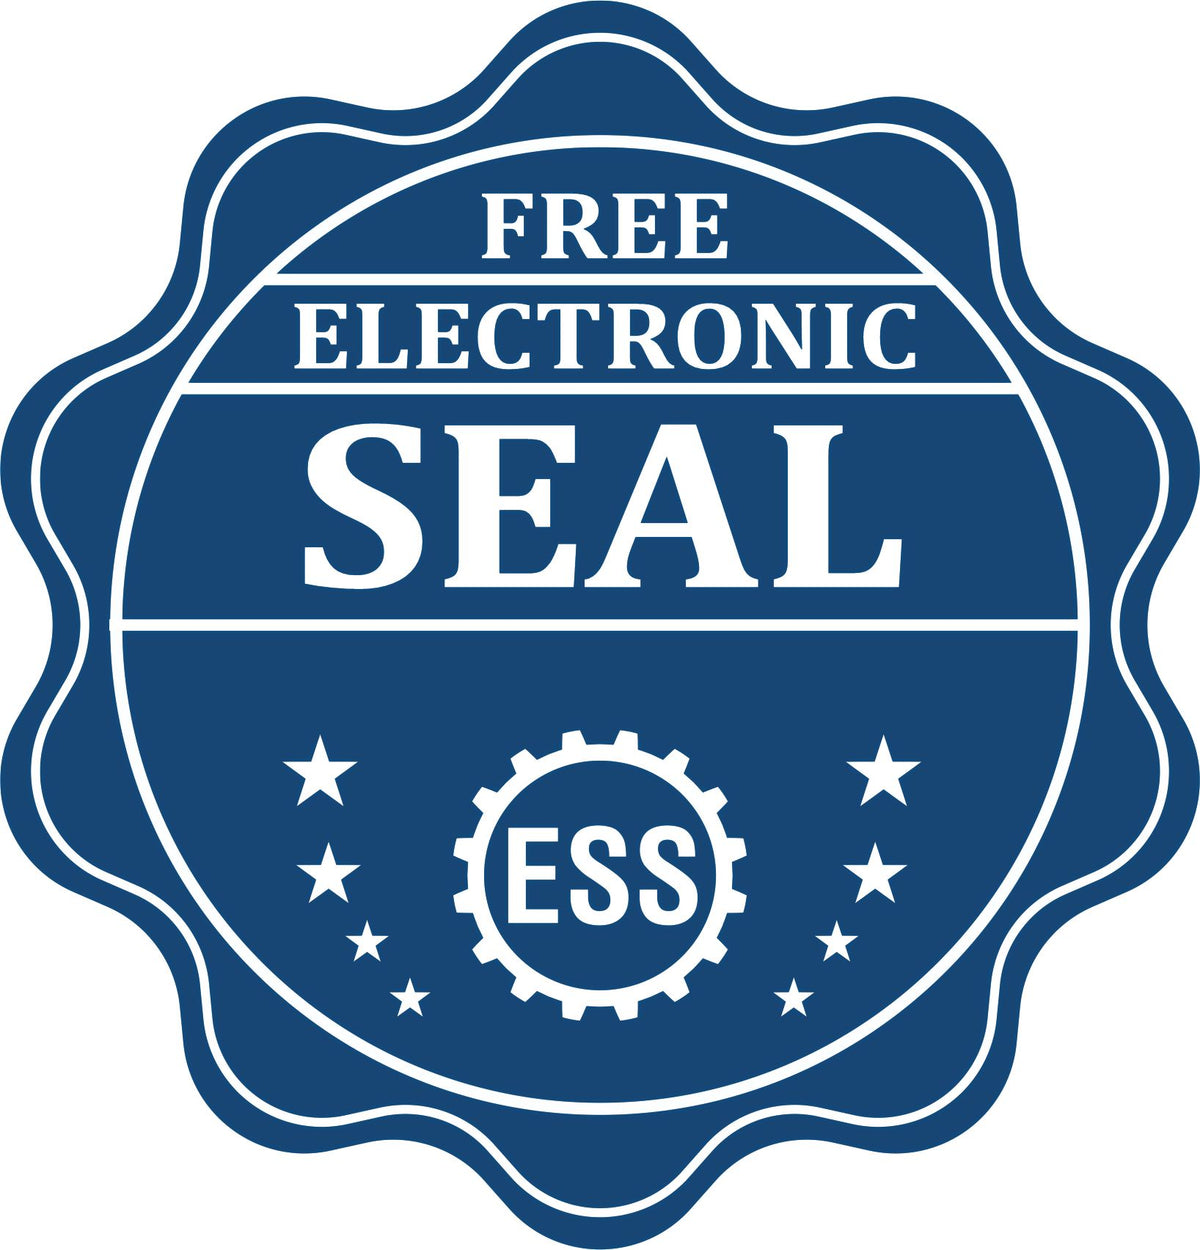 A badge showing a free electronic seal for the Wooden Handle Washington Rectangular Notary Public Stamp with stars and the ESS gear on the emblem.